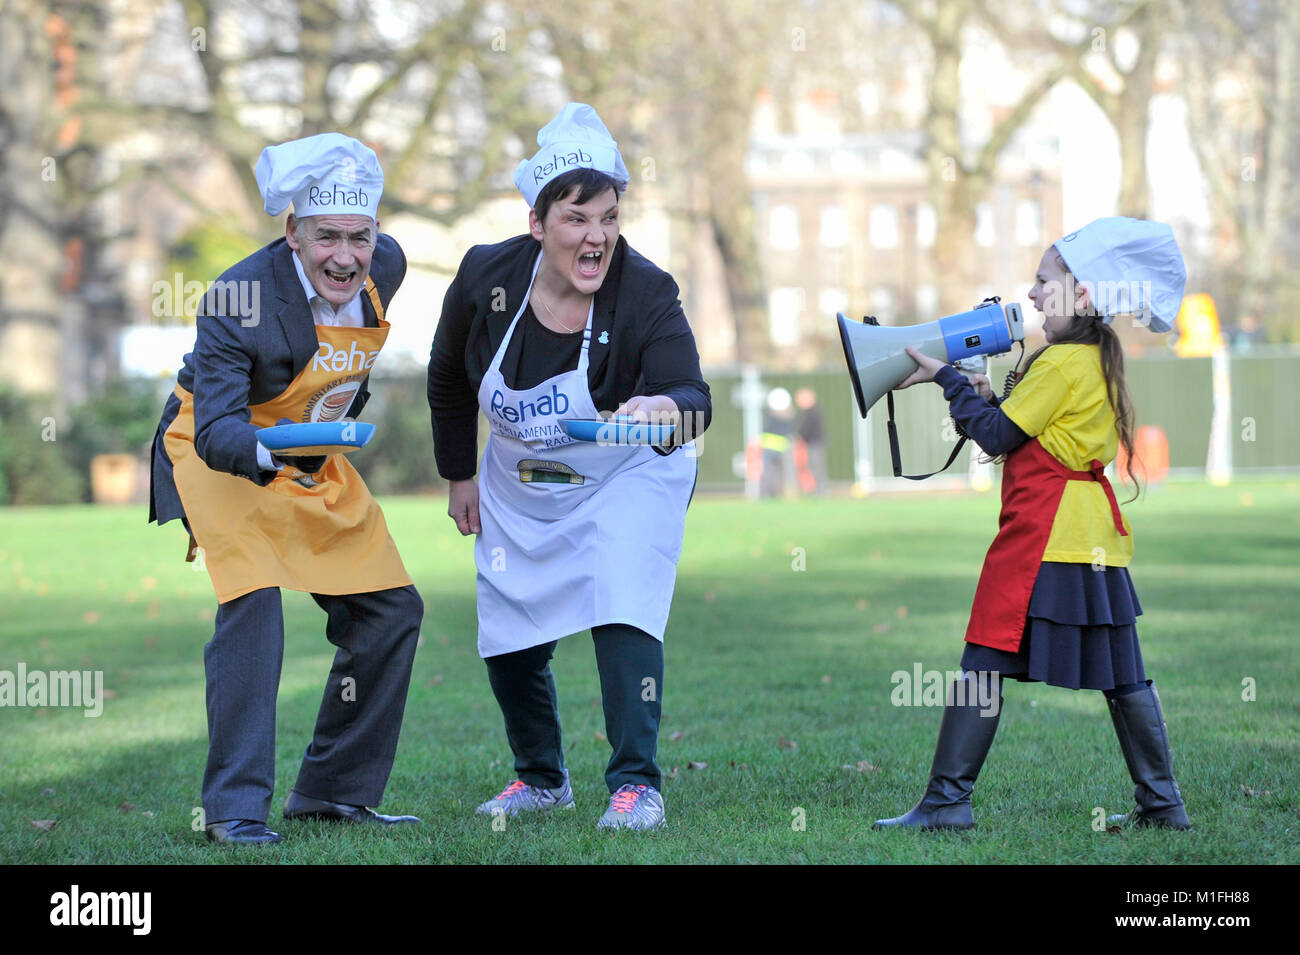 London, UK. 30th Jan, 2018. Race veteran and this year's Official Starter, ITV newscaster, Alastair Stewart OBE, oversees Tonia Antoniazzi MP for the Parliament Team, take part in a pancake race bootcamp in Westminster ahead of the main event, the Rehab Parliamentary Pancake Race, on Shrove Tuesday. Team mascot Grace aged 8, from St Matthew's Primary School in Westminster, offers encouragement. Credit: Stephen Chung/Alamy Live News Stock Photo